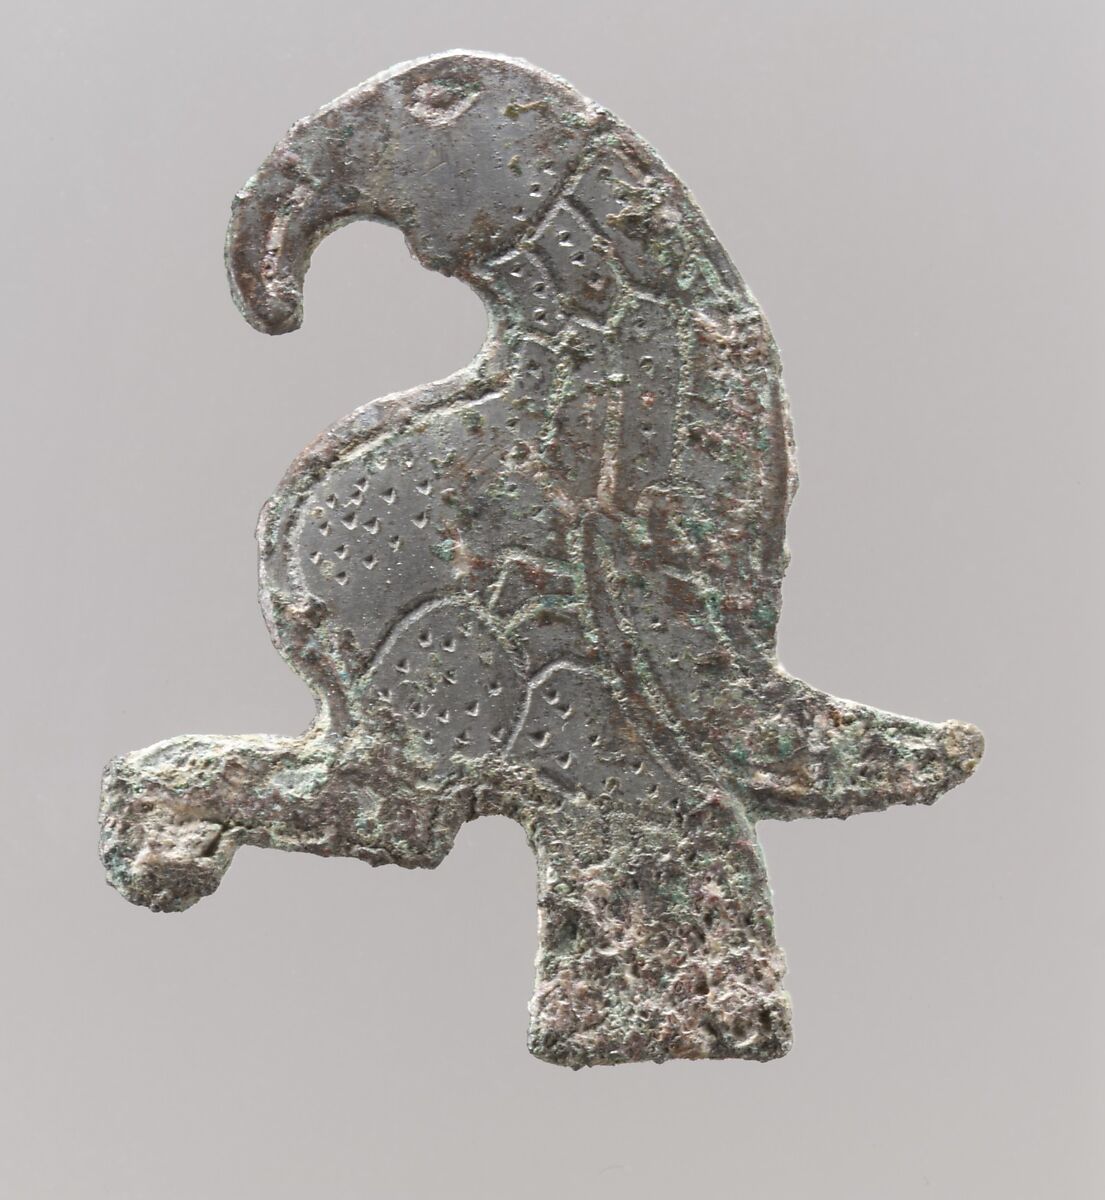 Purse Mount in the Form of a Bird, Copper alloy, "tinned" surface, Frankish 